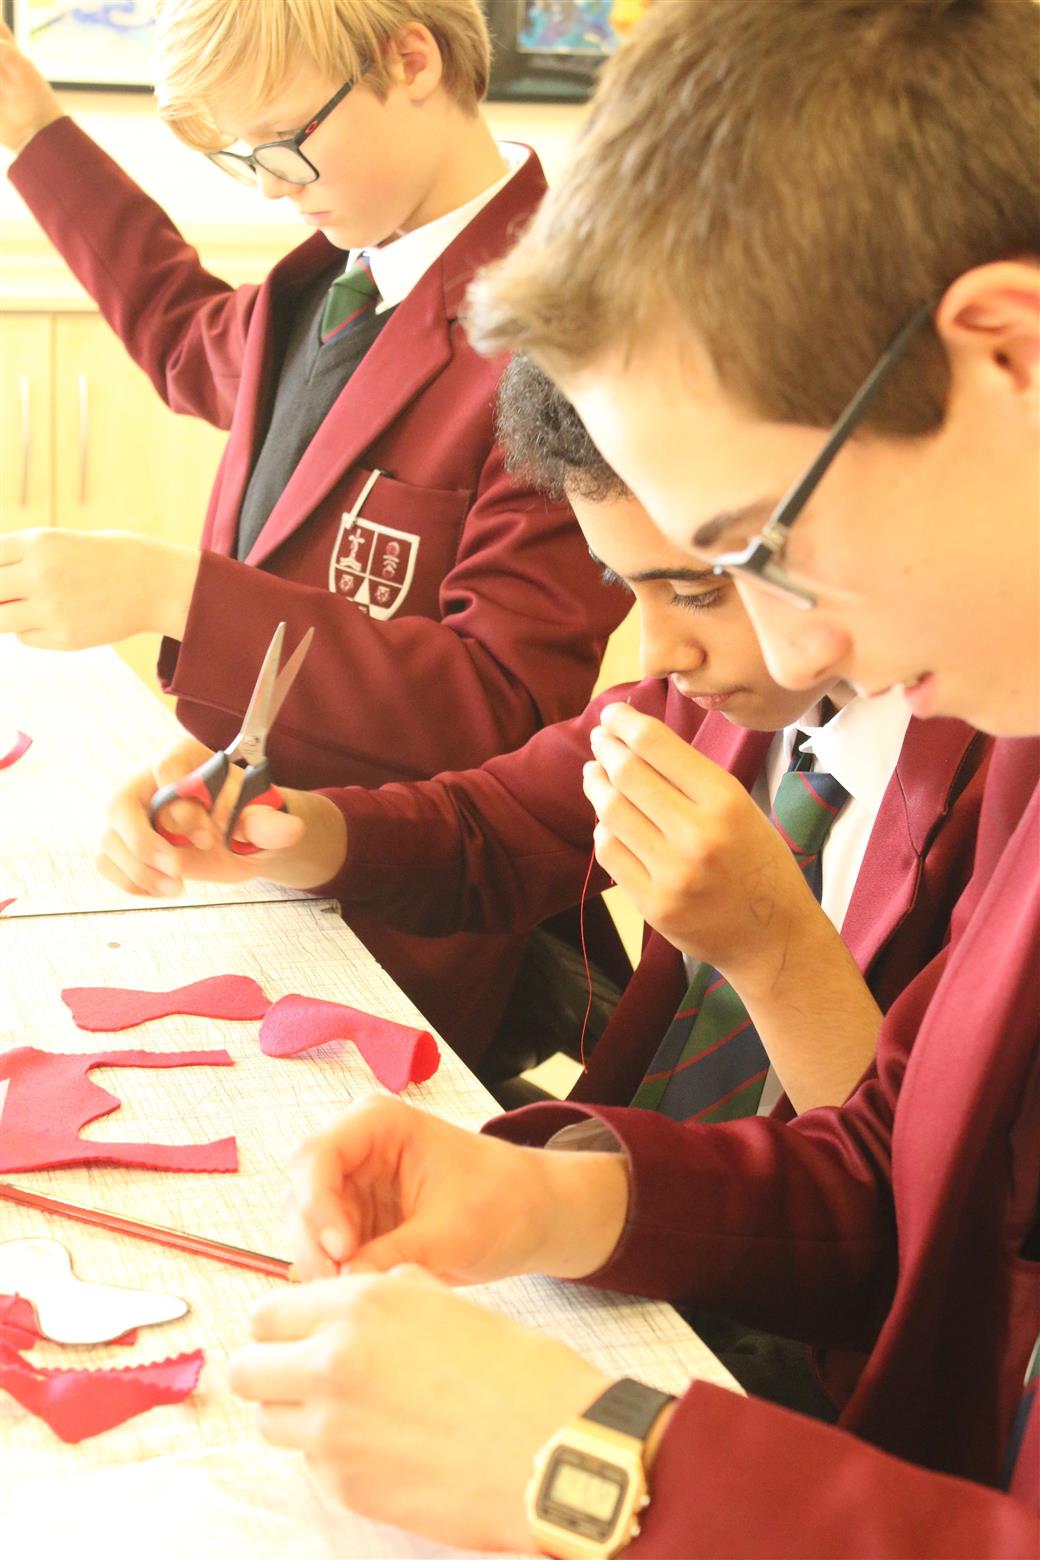 Year 9 students prepare art project for Remembrance Day